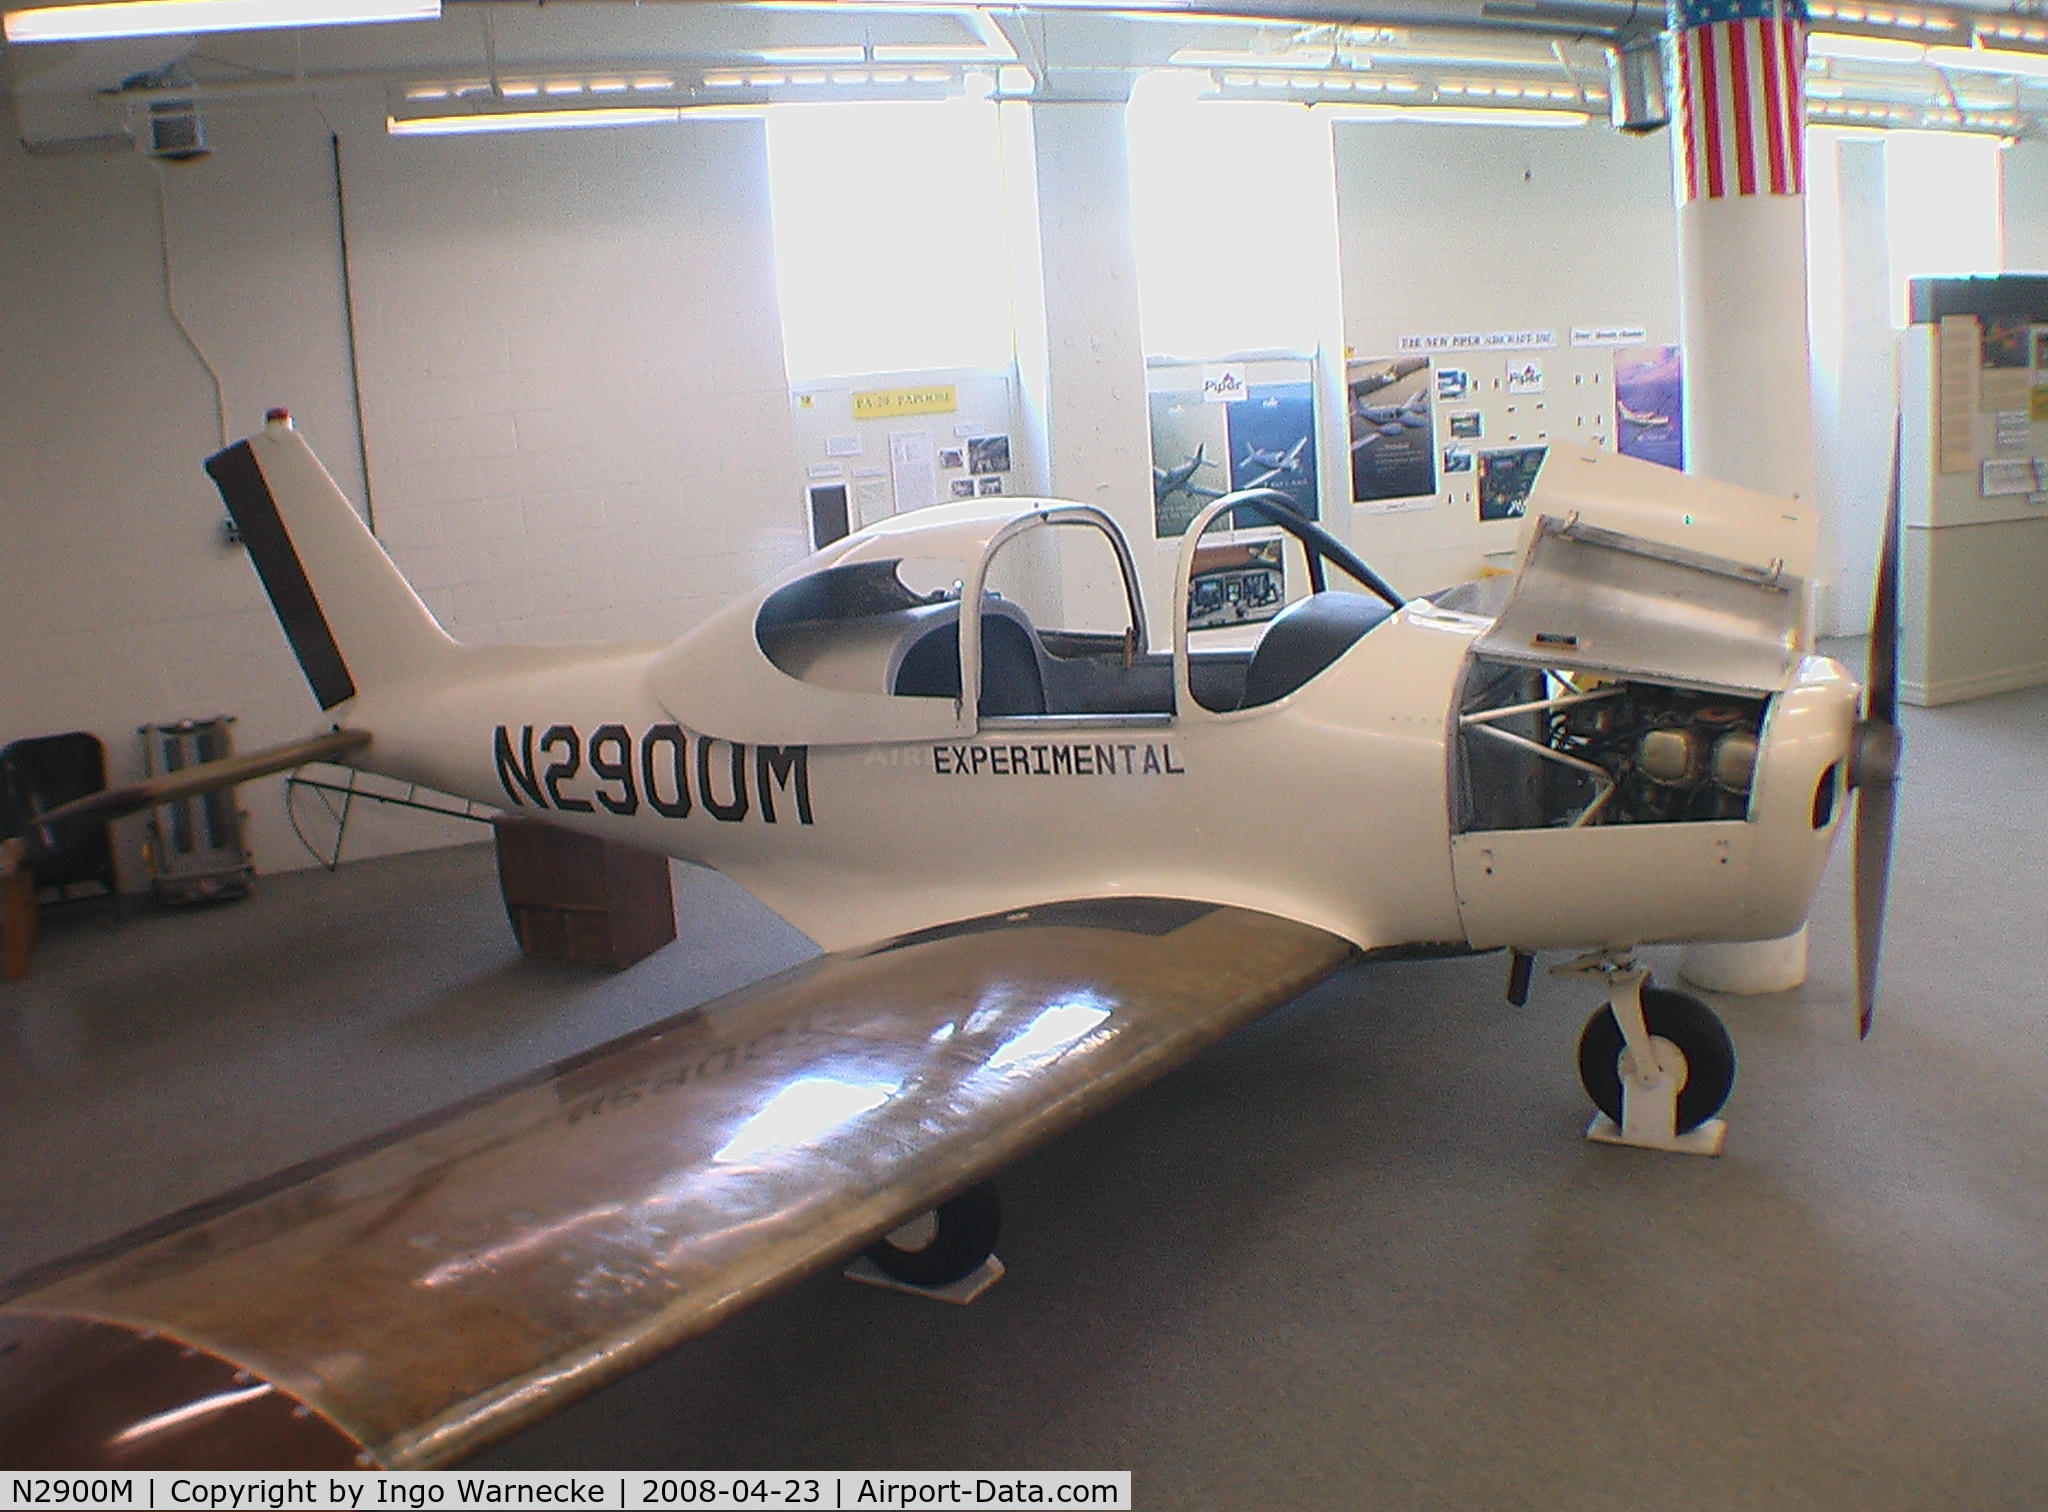 N2900M, 1962 Piper PA-29 C/N 29-01, Piper PA-29 Papoose Prototype at Piper Aircraft Museum, Lock Haven PA